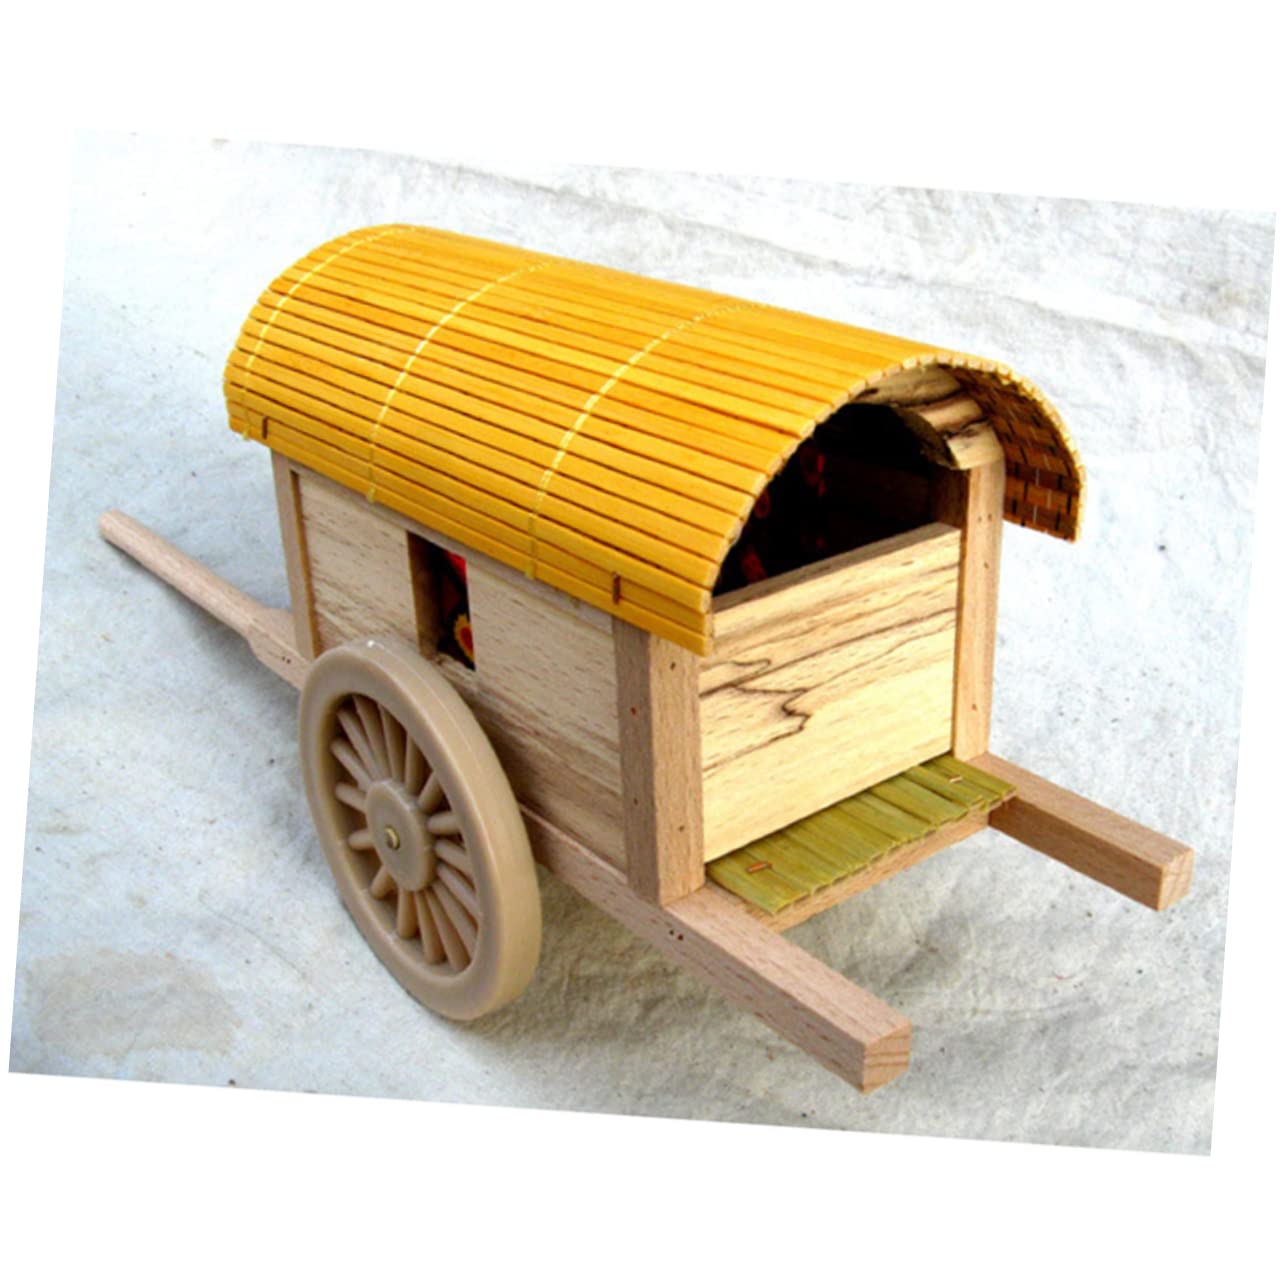 ERINGOGO 1pc Doll House Miniature Wooden Carriage Decorate Wooden Farm Toy Carriage Model Infant Sponge for Sink Home Accents Decor Mini House Kit Wood Adornment Models Mara Desktop Bamboo